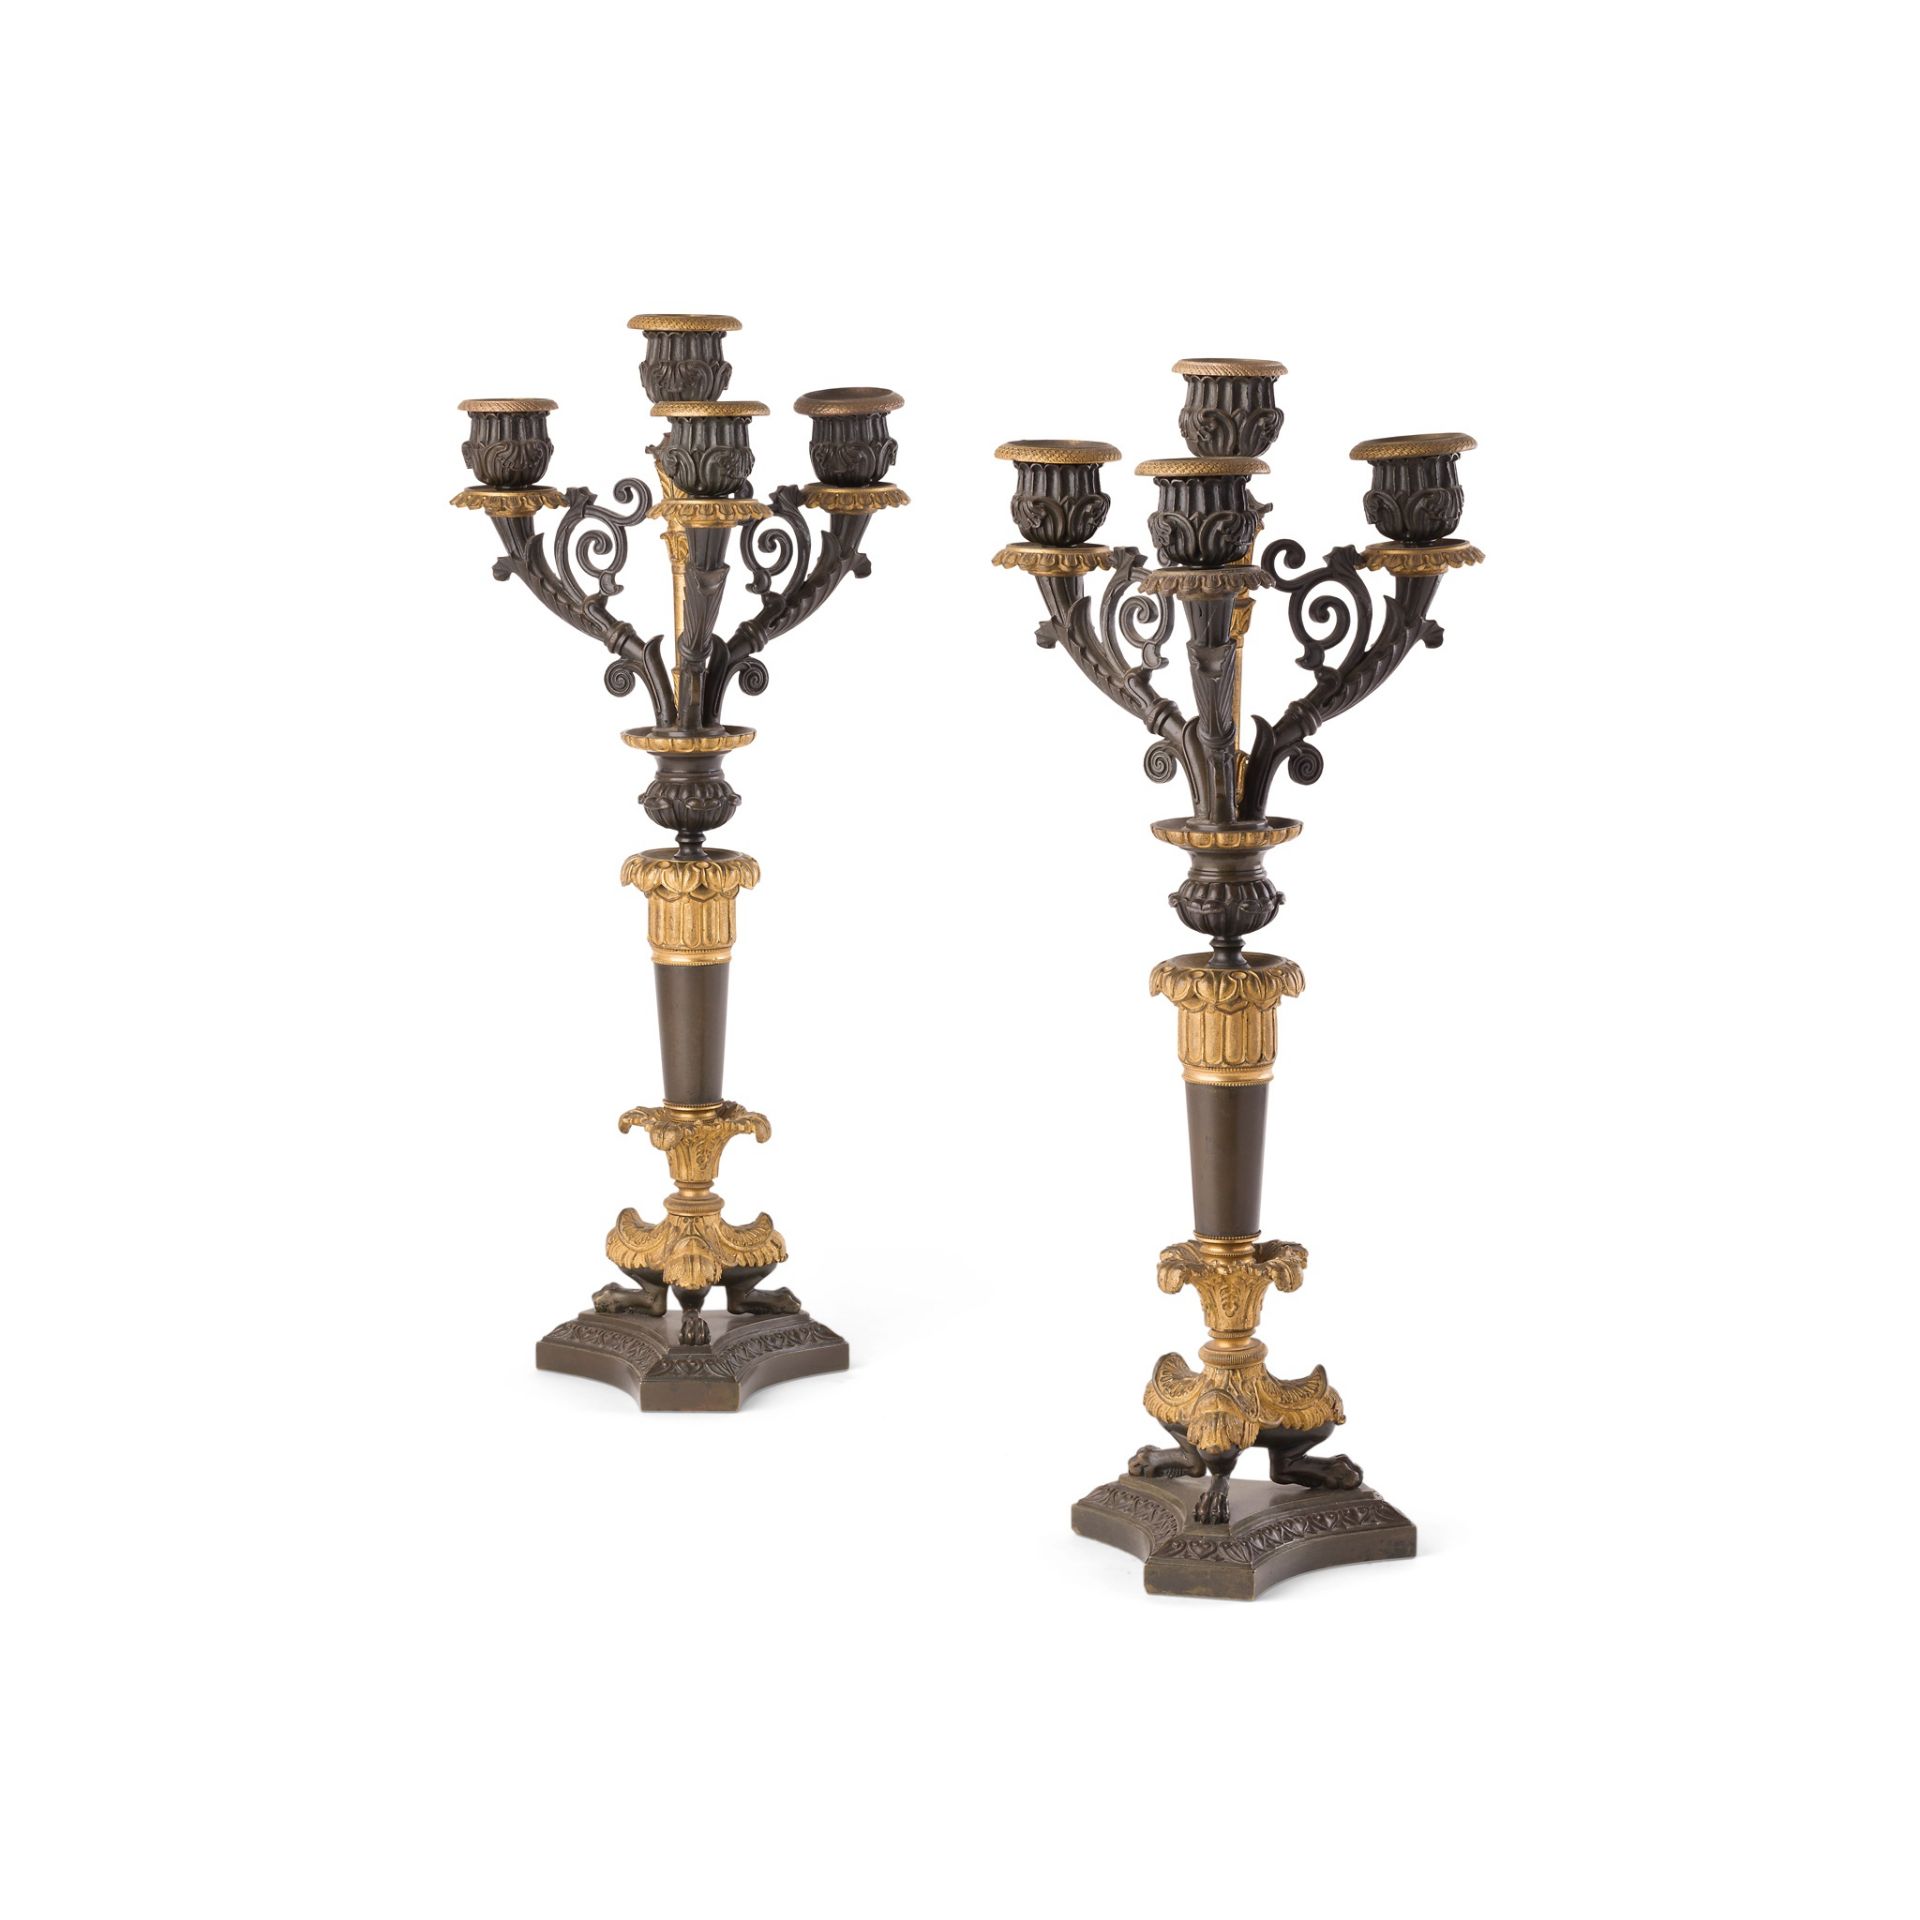 PAIR OF FRENCH EMPIRE PATINATED AND GILT BRONZE CANDELABRA EARLY 19TH CENTURY